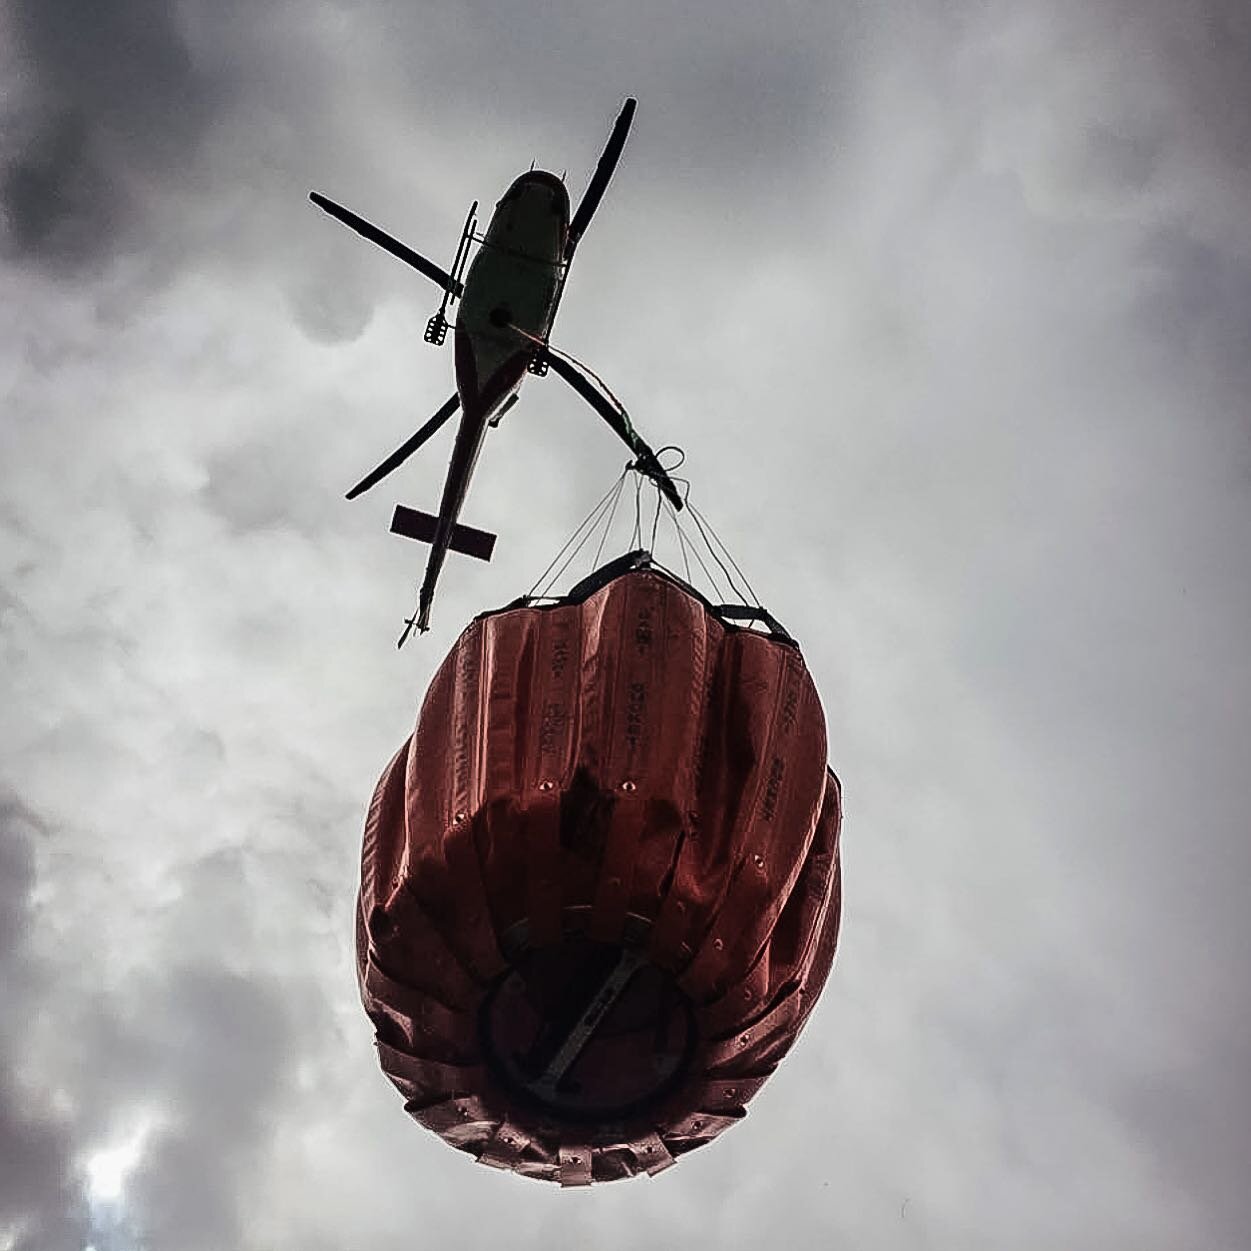 It&rsquo;s hard to believe it&rsquo;s almost half way through April already! 🗓️ 

&hellip;That means it&rsquo;s time to get geared up for #wildfireseason 🚁 

#bambibucket #wildfireseason #trkheli #pilotlife #bell412